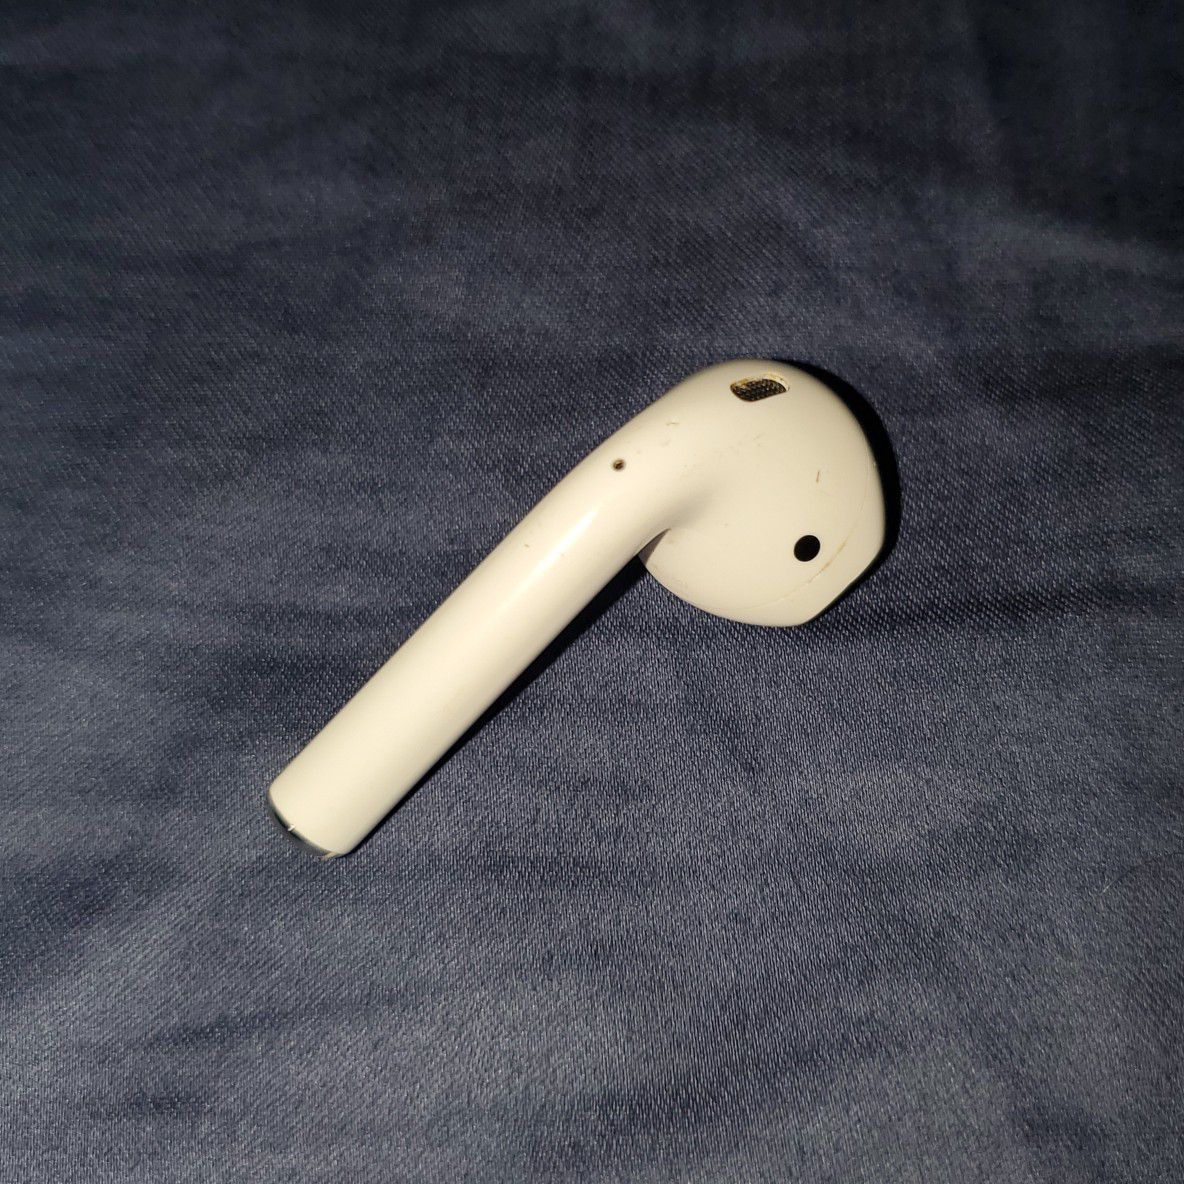 Apple Airpods (Right Earbud Only)